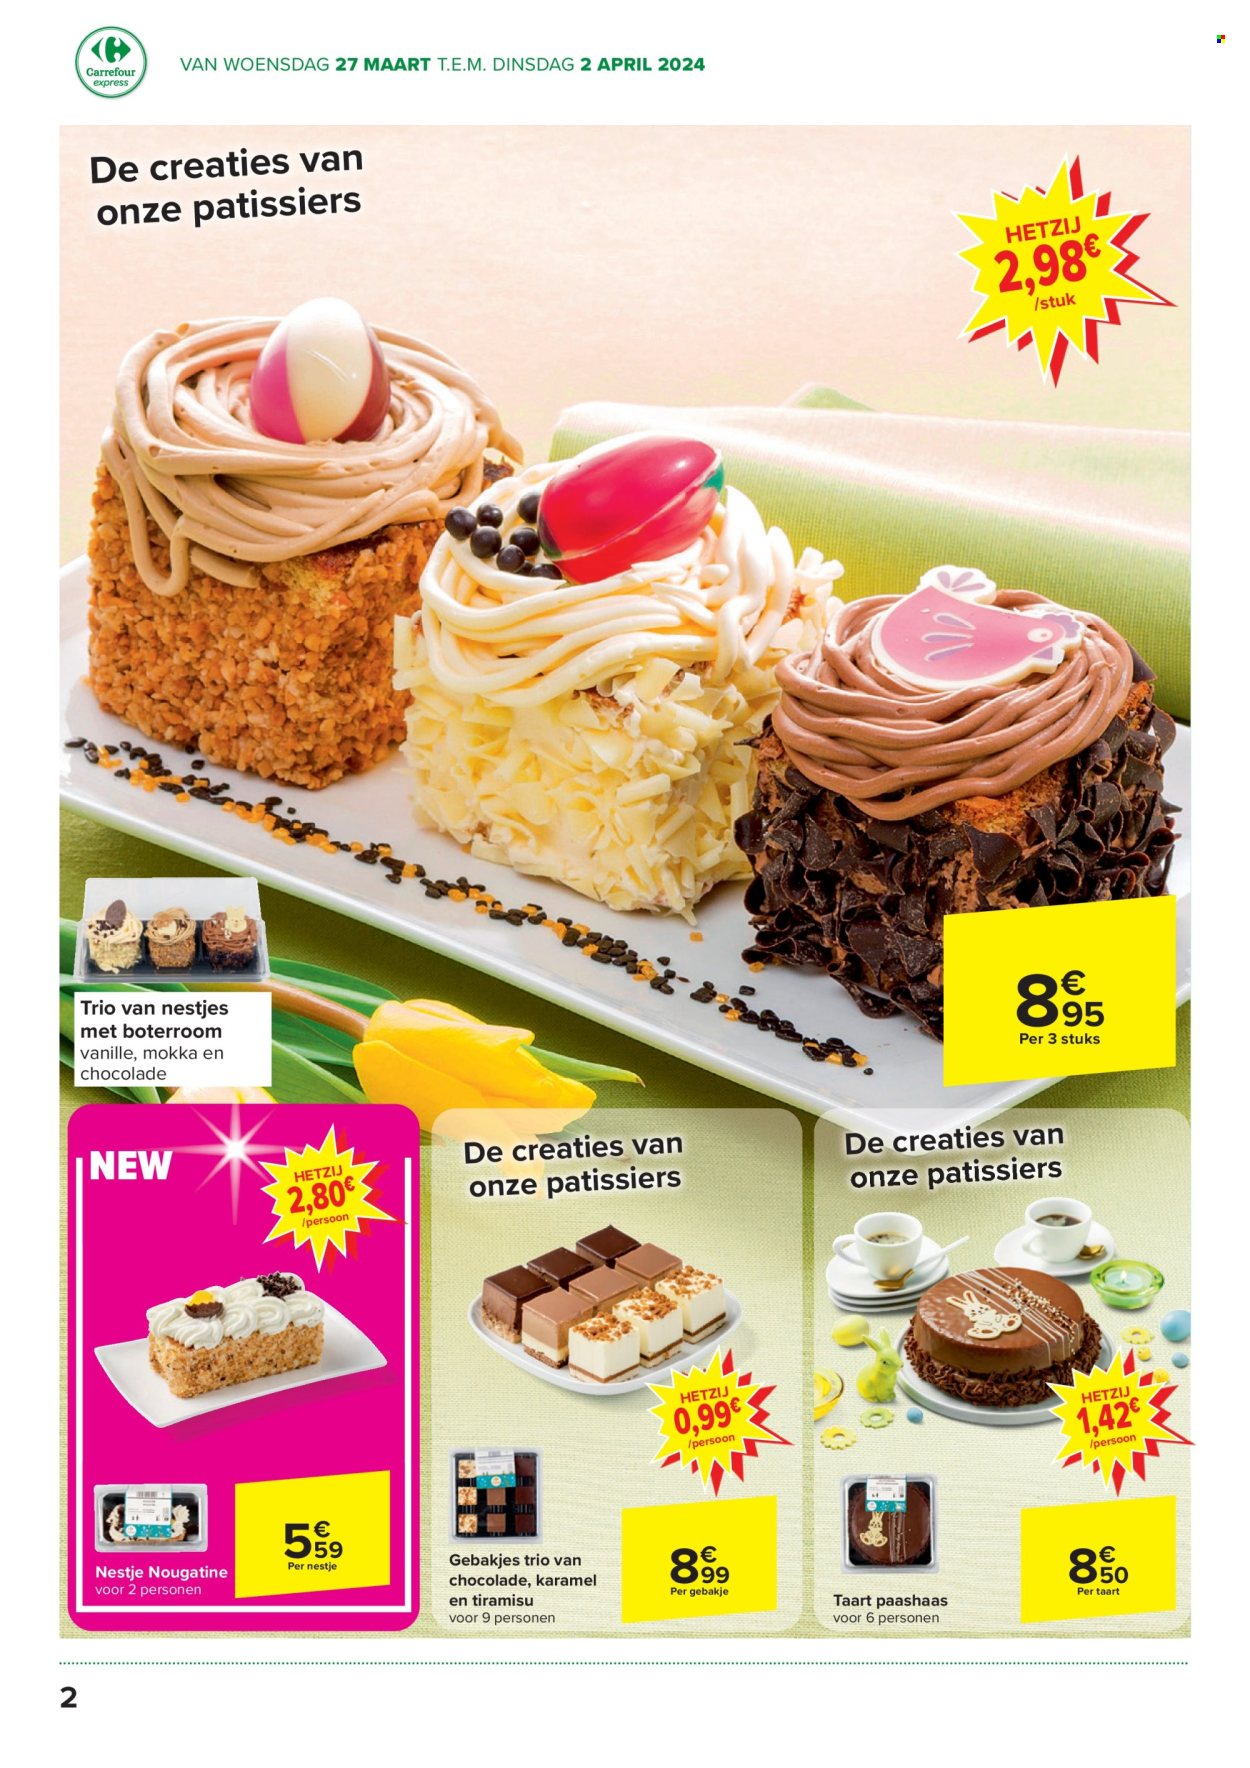 Catalogue Carrefour express - 27.3.2024 - 2.4.2024. Page 2.